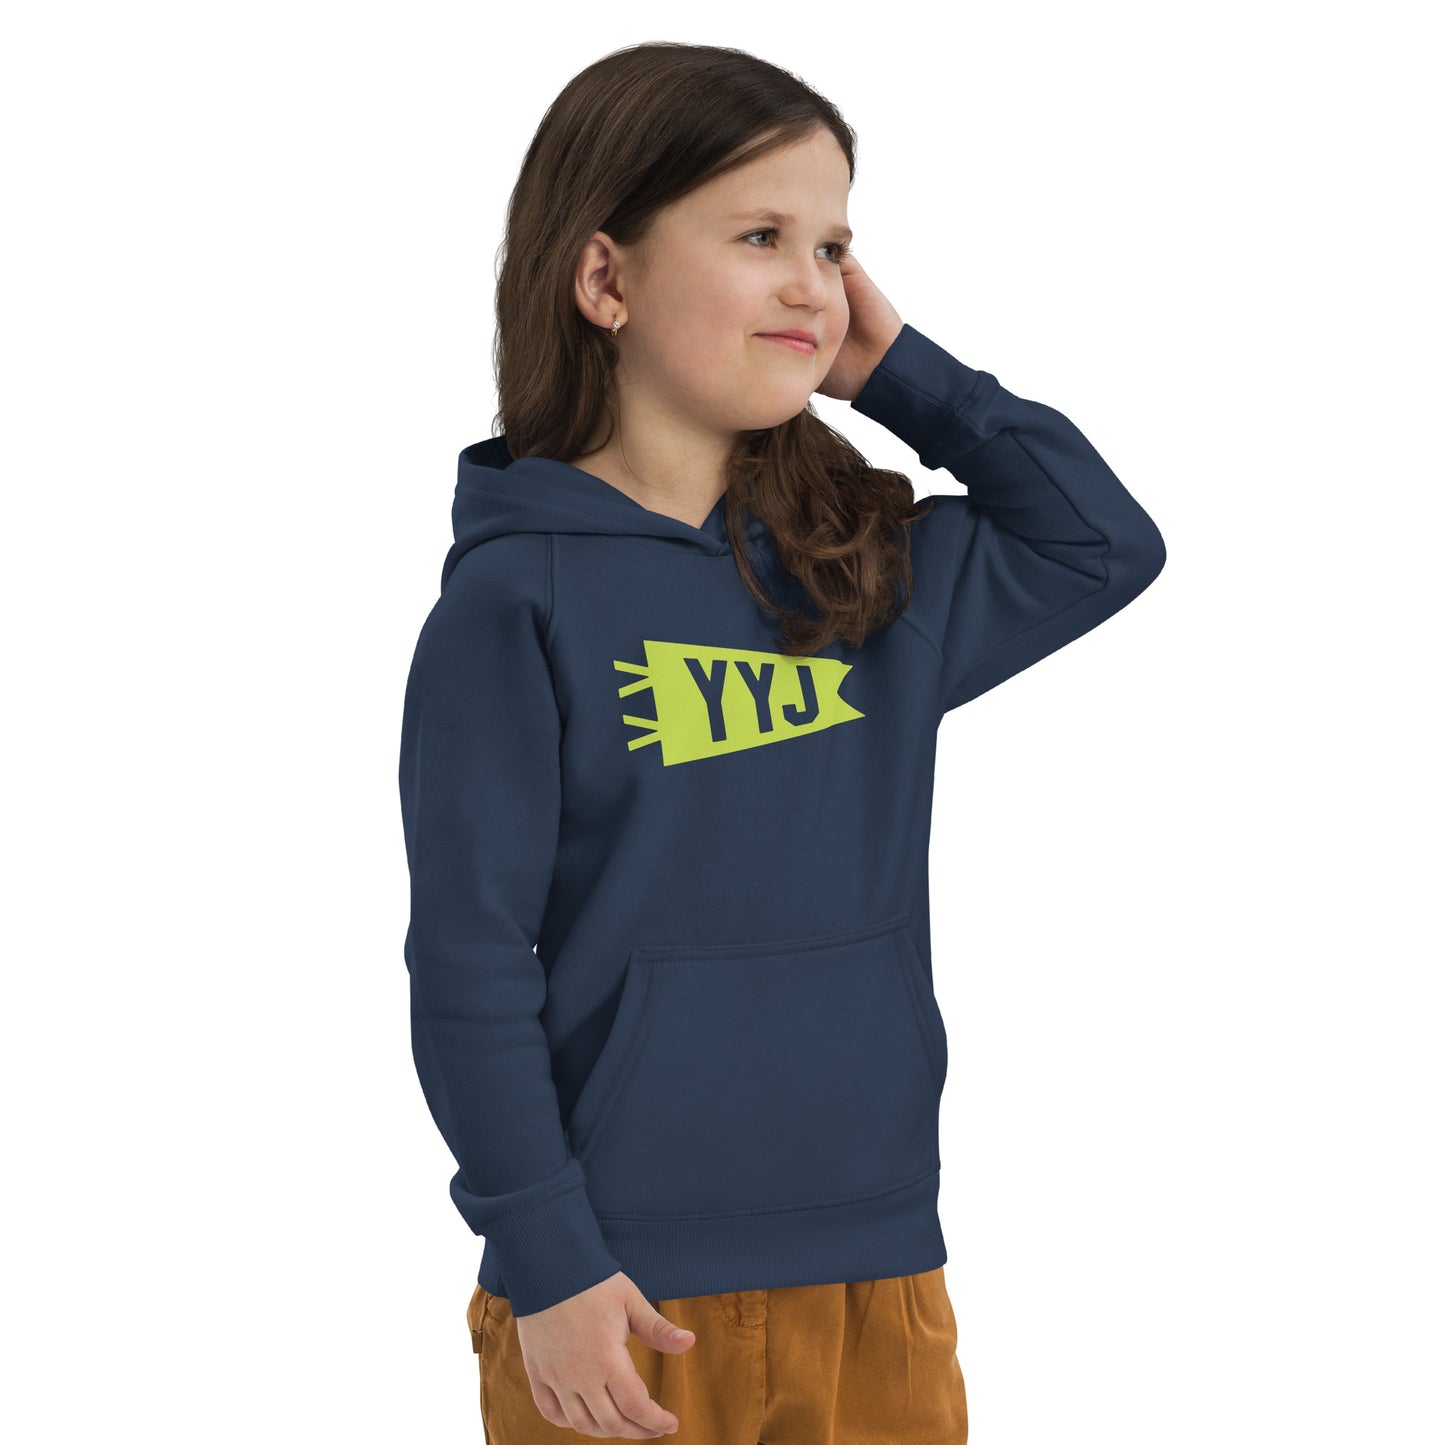 Kid's Sustainable Hoodie - Green Graphic • YYJ Victoria • YHM Designs - Image 06